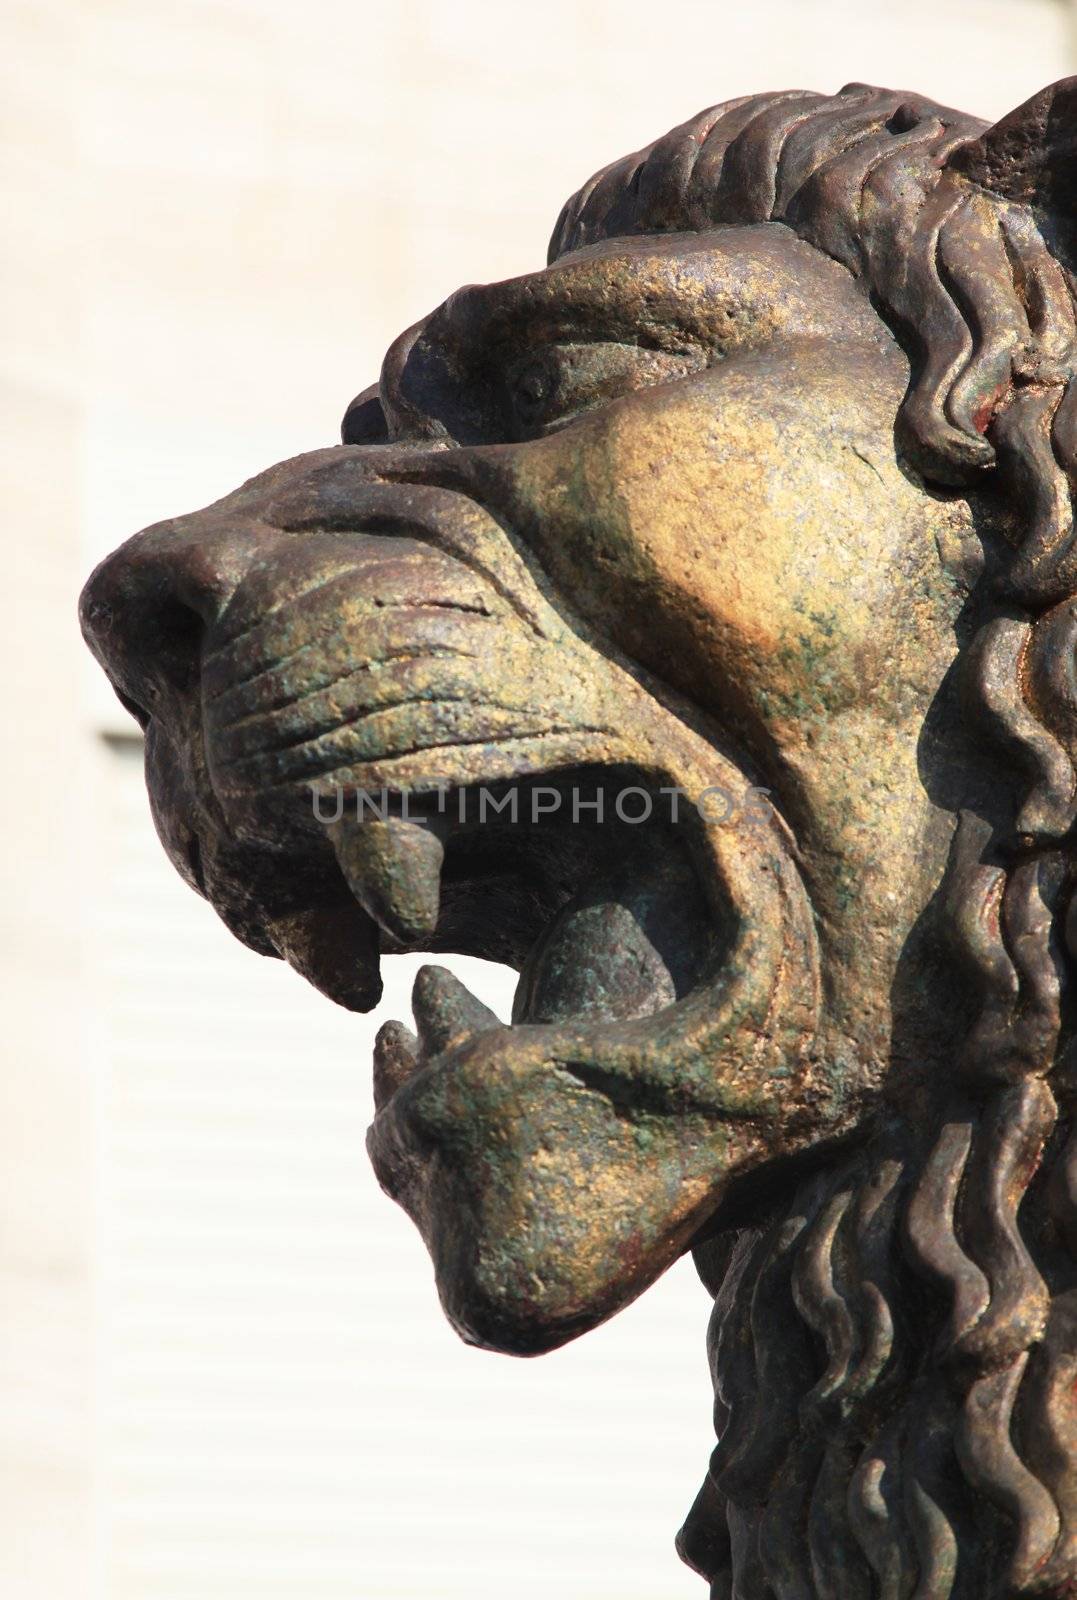 Close-up of Golden Lion symbol of the 69th Venice Film Festival